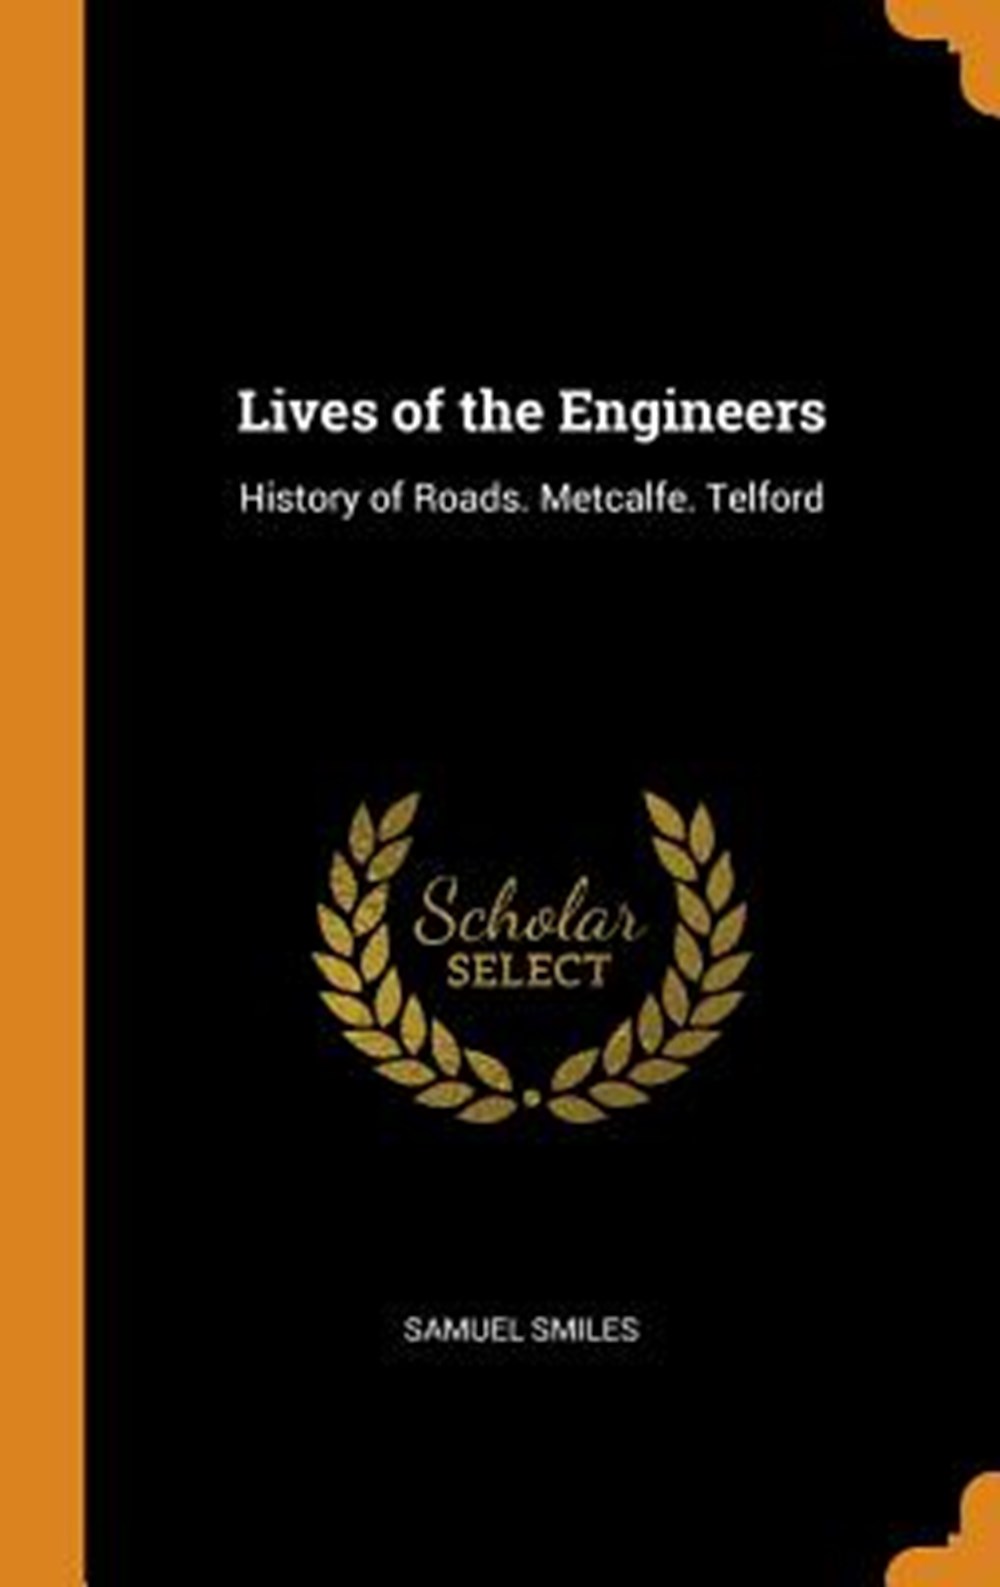 Lives of the Engineers History of Roads. Metcalfe. Telford